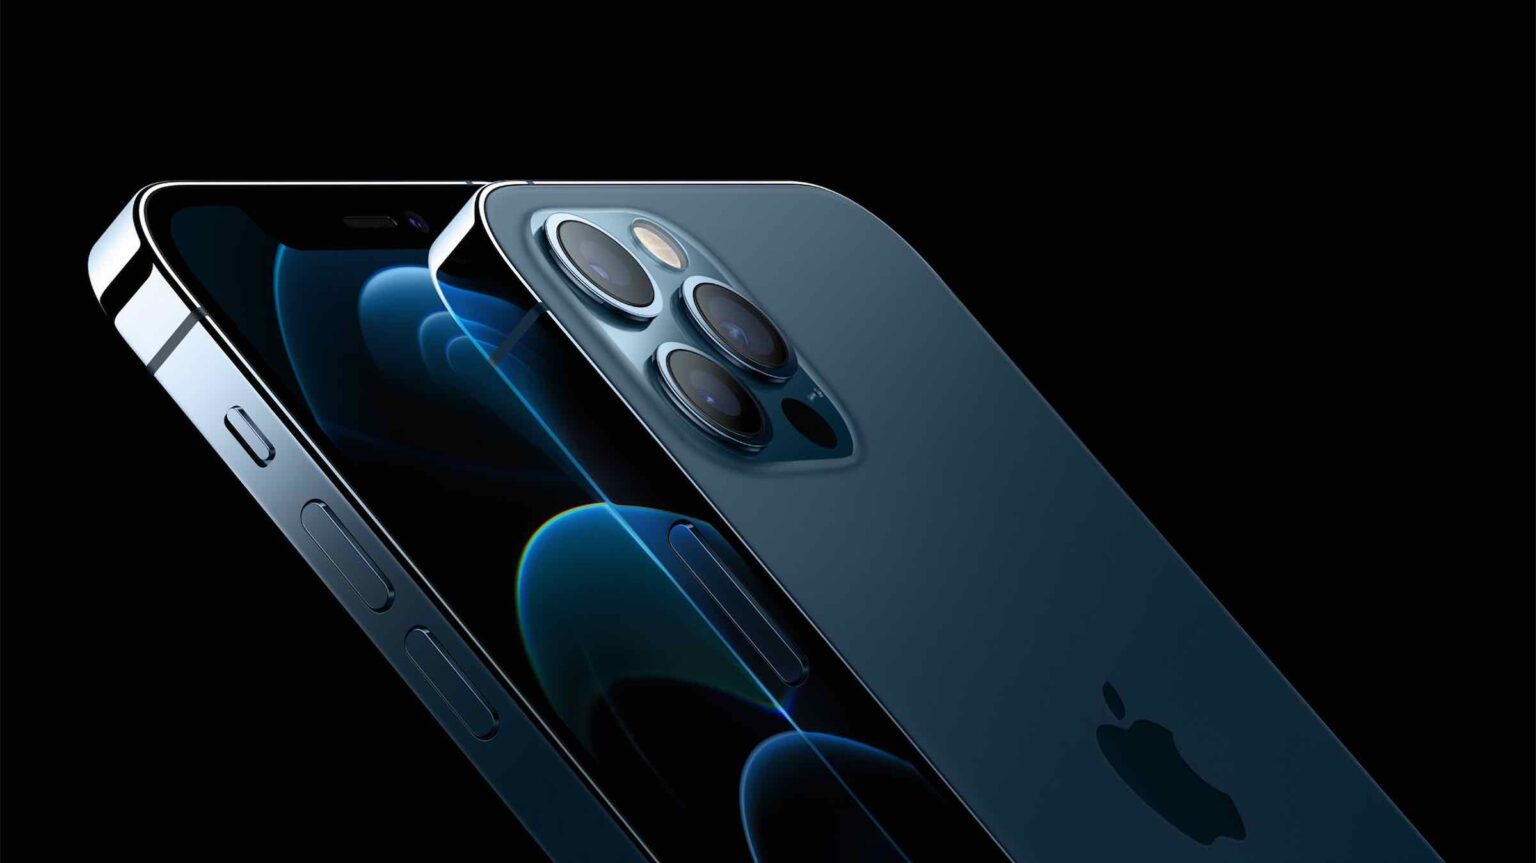 Apple fanatics can't stop asking – when is the iPhone 12 coming out? Here's everything we know about the new products to come.